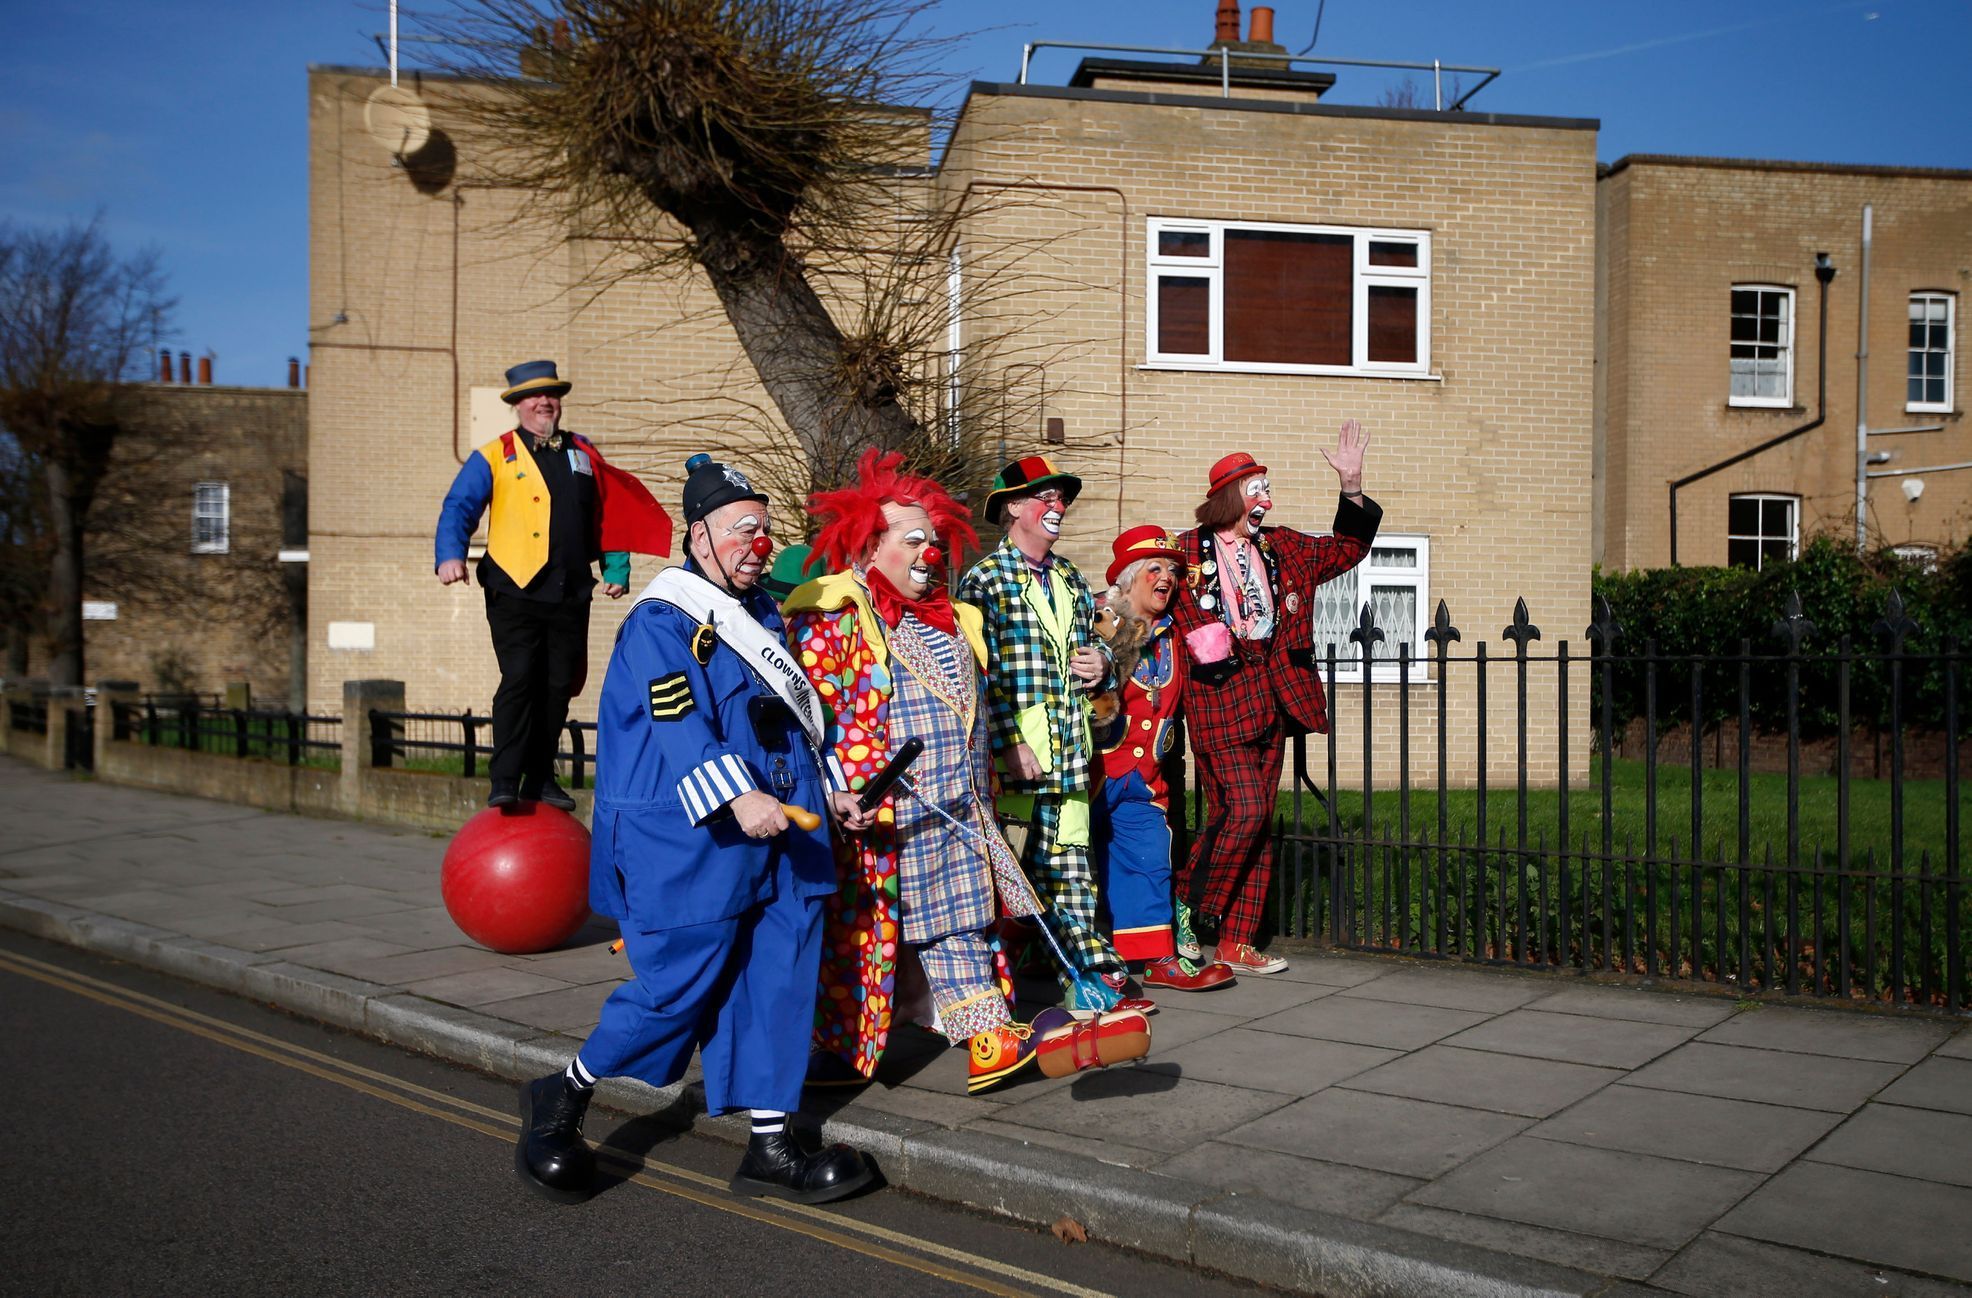 Clowns arrive at the All Saints Church before the Grimaldi clown service in Dalston, north London